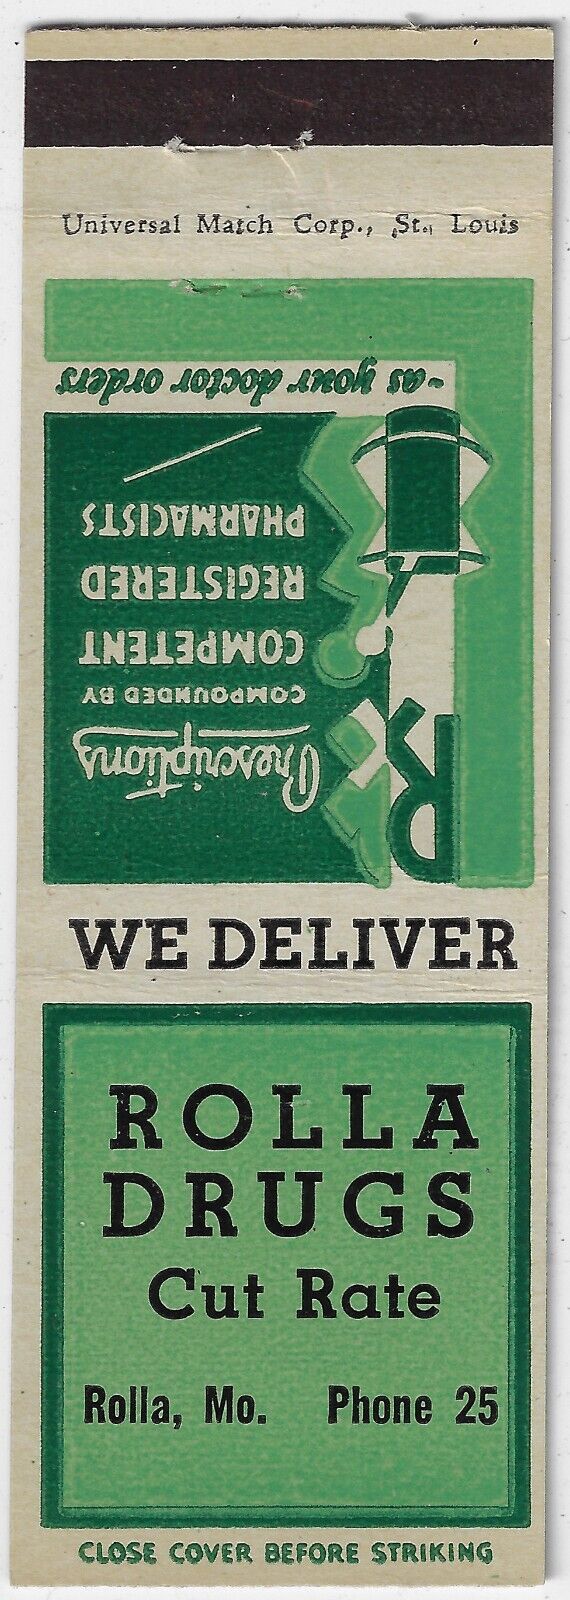 Rolla Drugs Cut Rate Phone 25  FS Empty Matchbook Cover